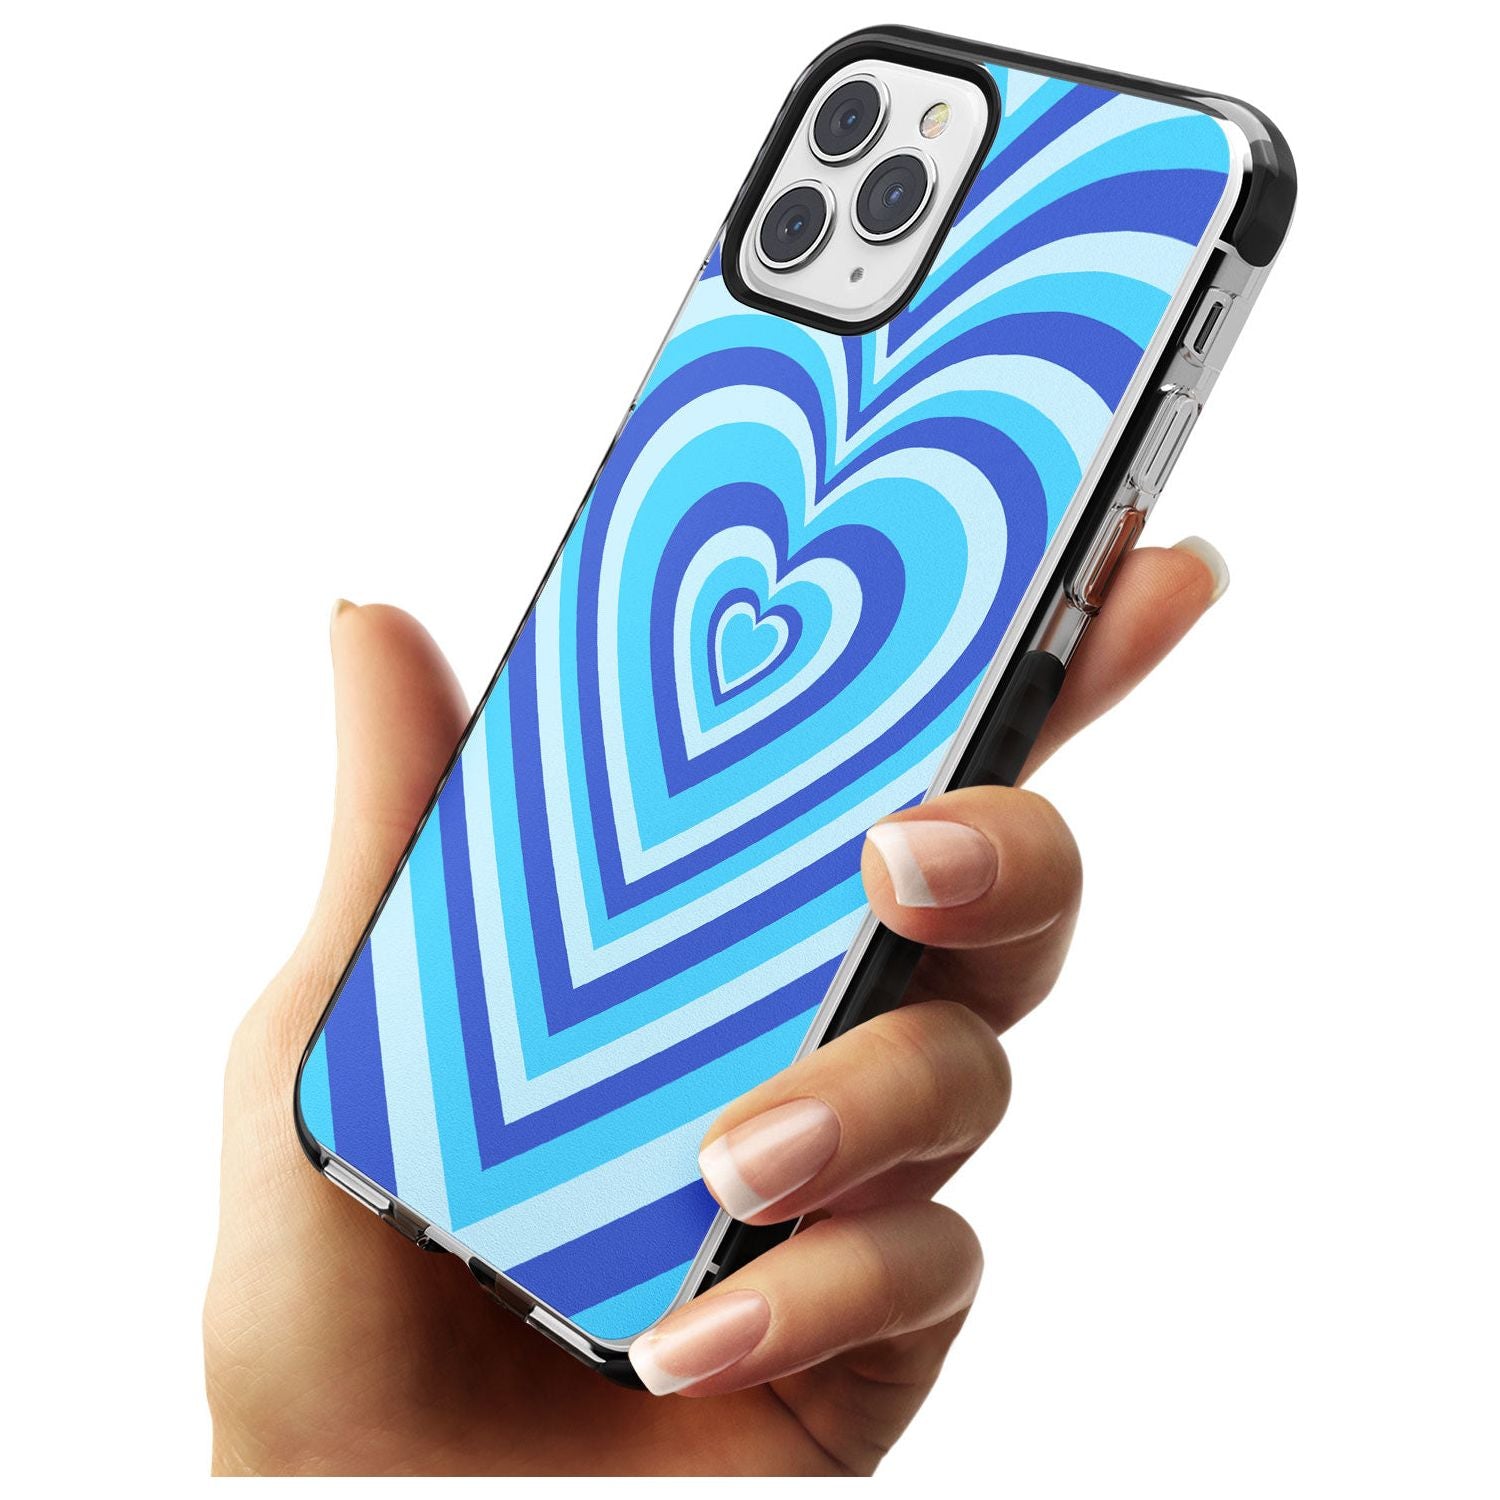 Blue Heart Illusion Black Impact Phone Case for iPhone 11